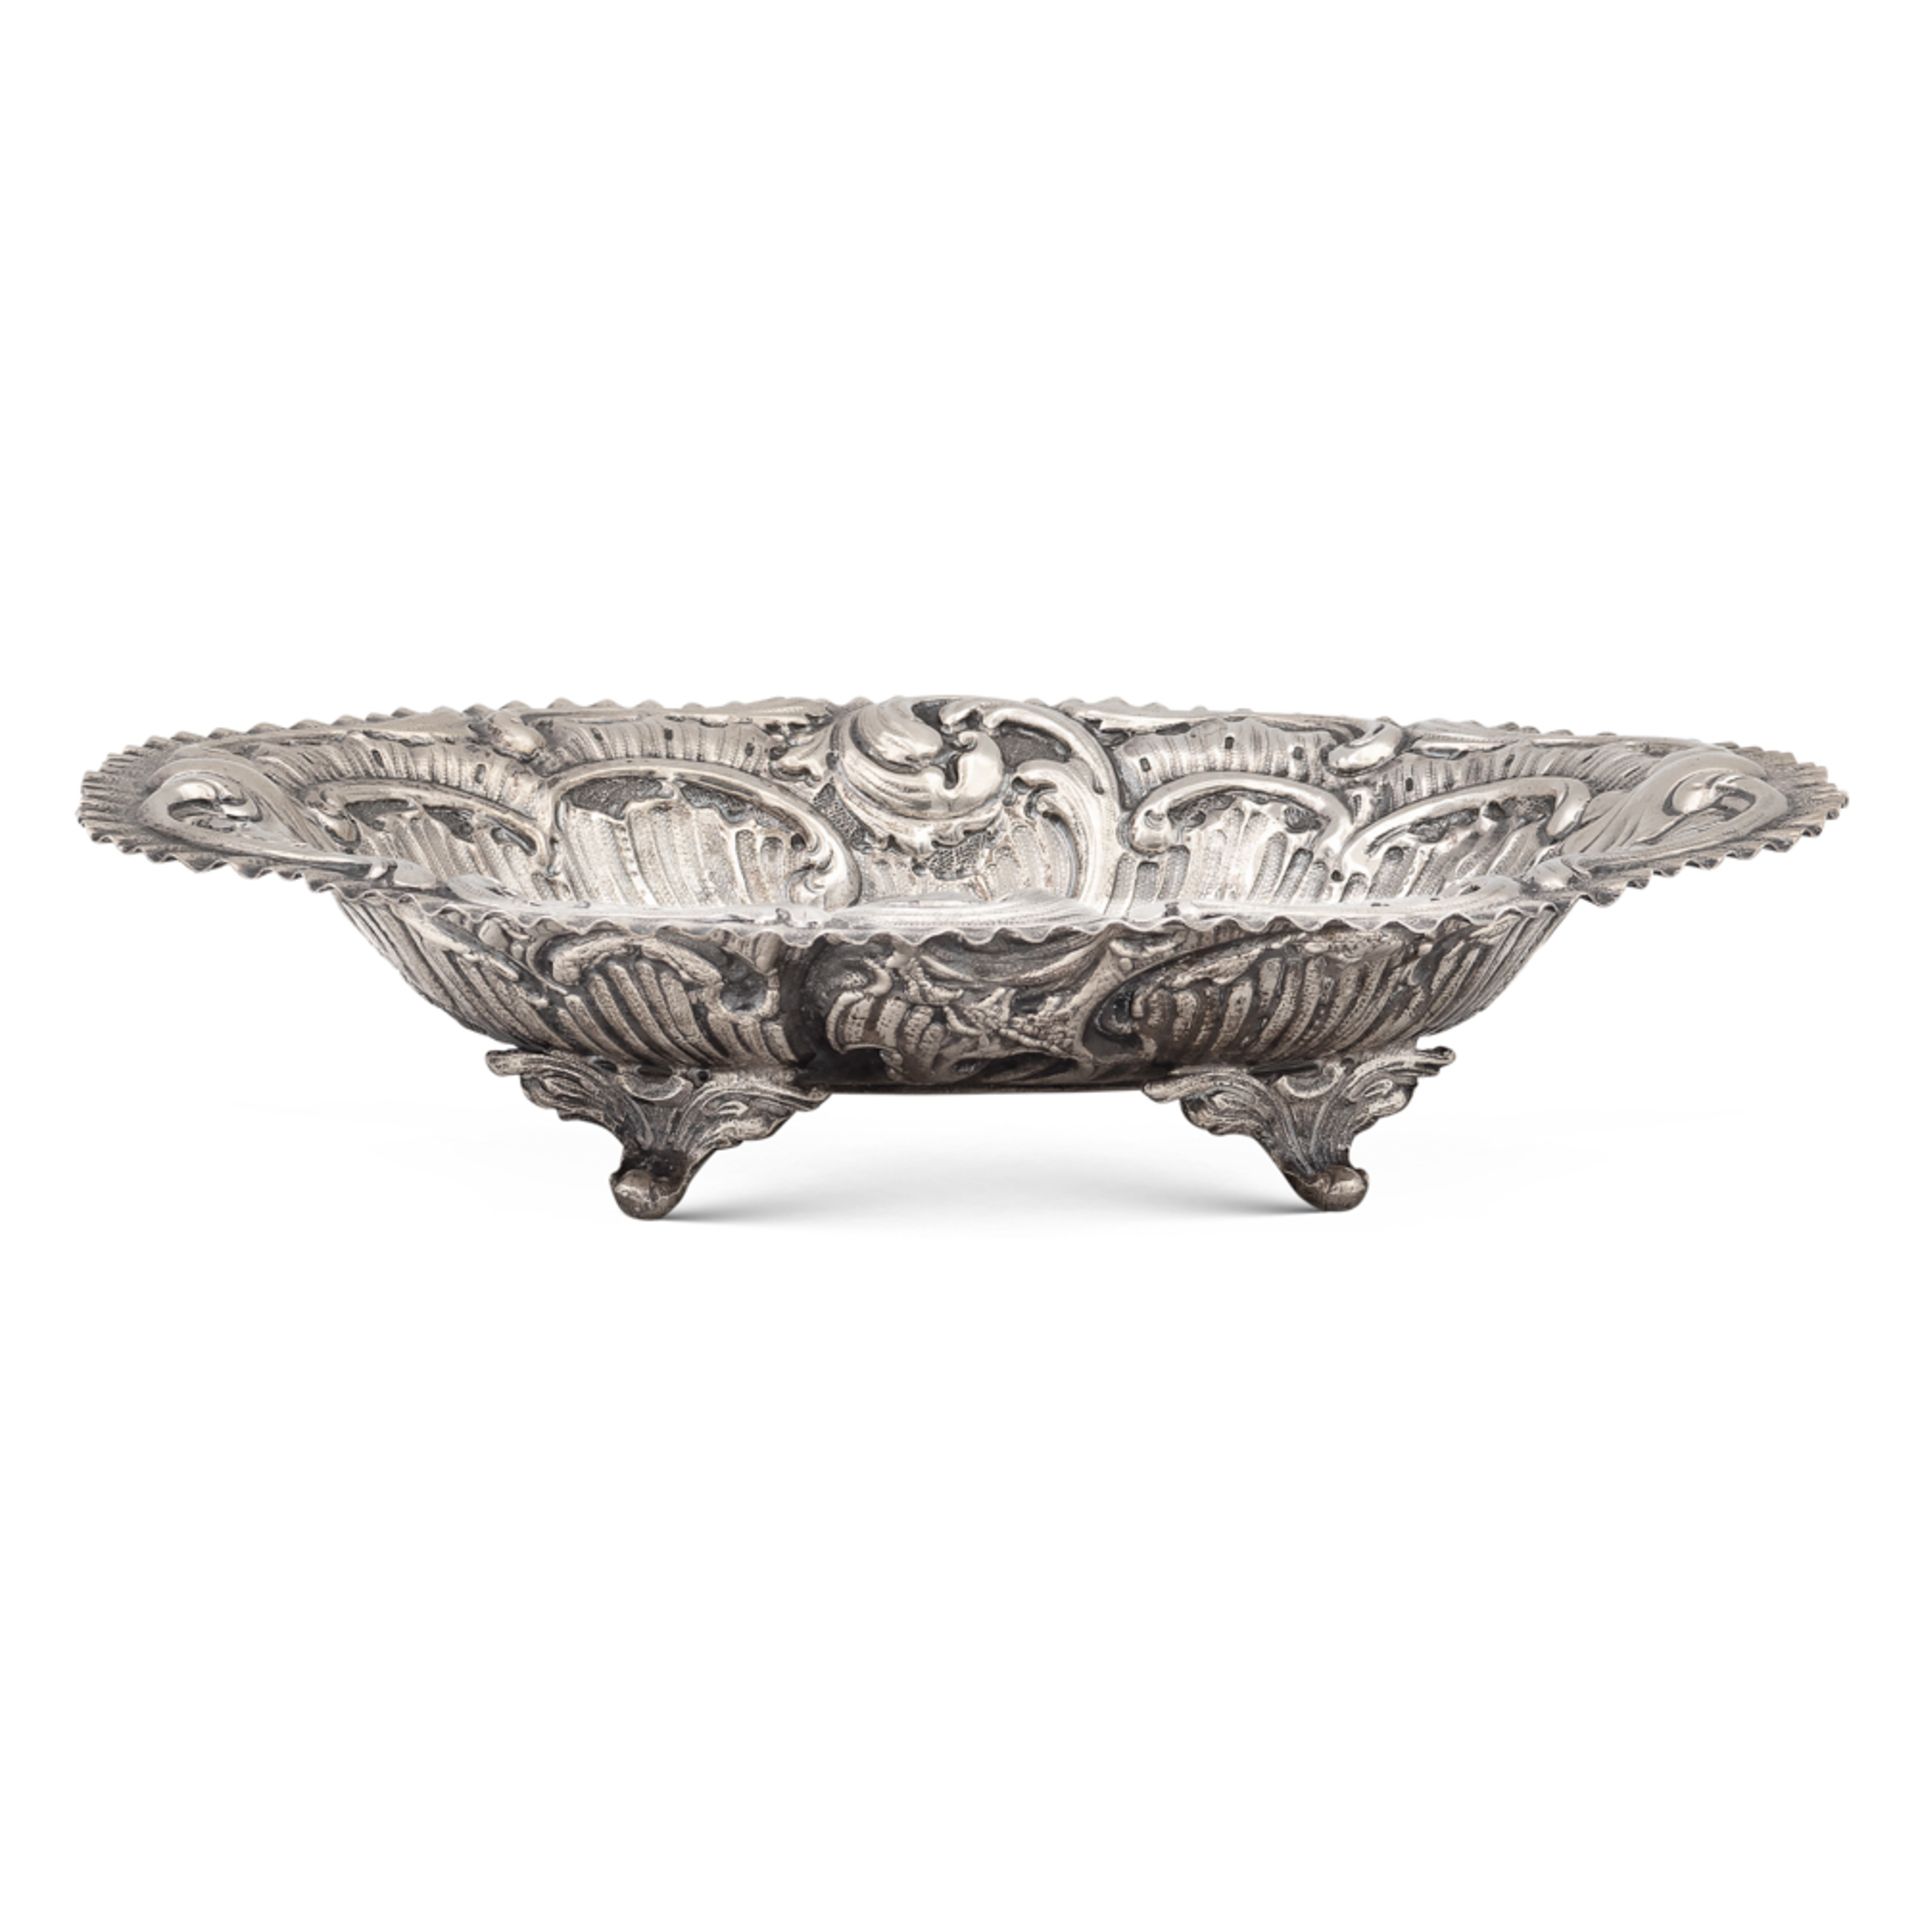 Silver basket Italy, 20th century 5x26x20,5 cm. oval shape, shaped profile, resting on four feet,